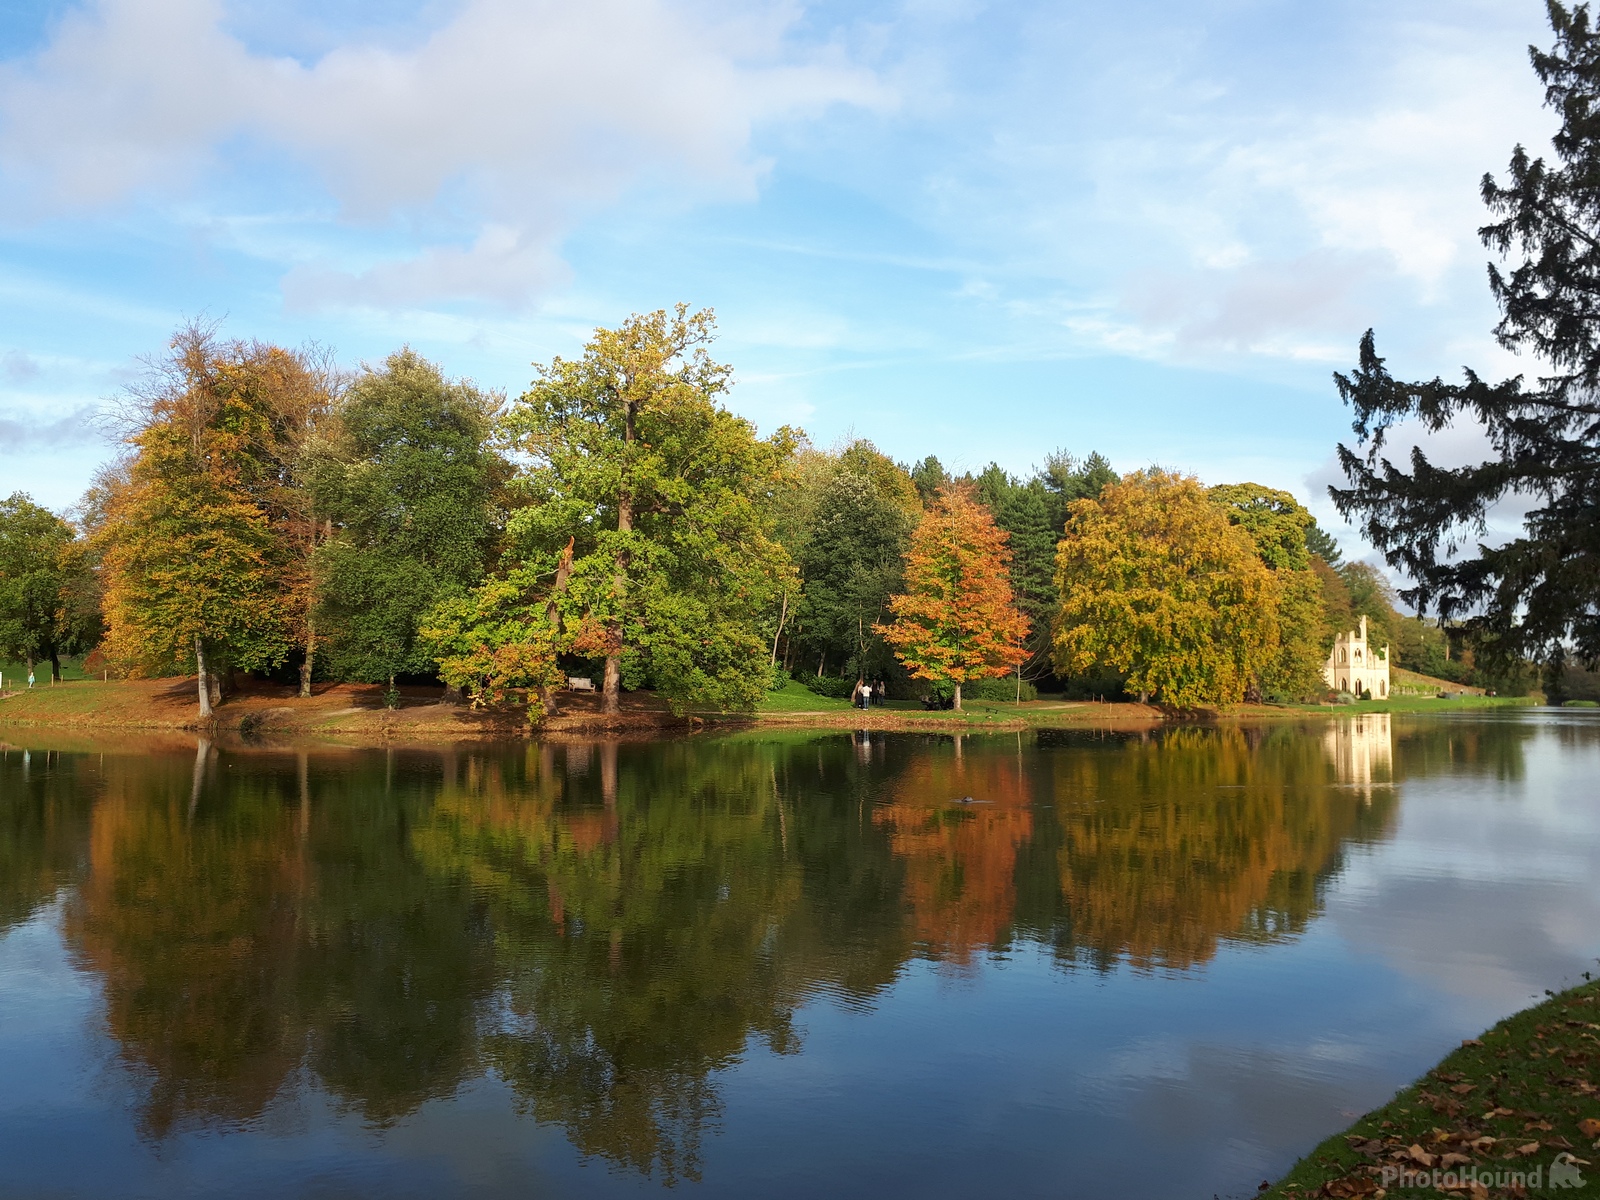 Image of Painshill Park by barnes vos